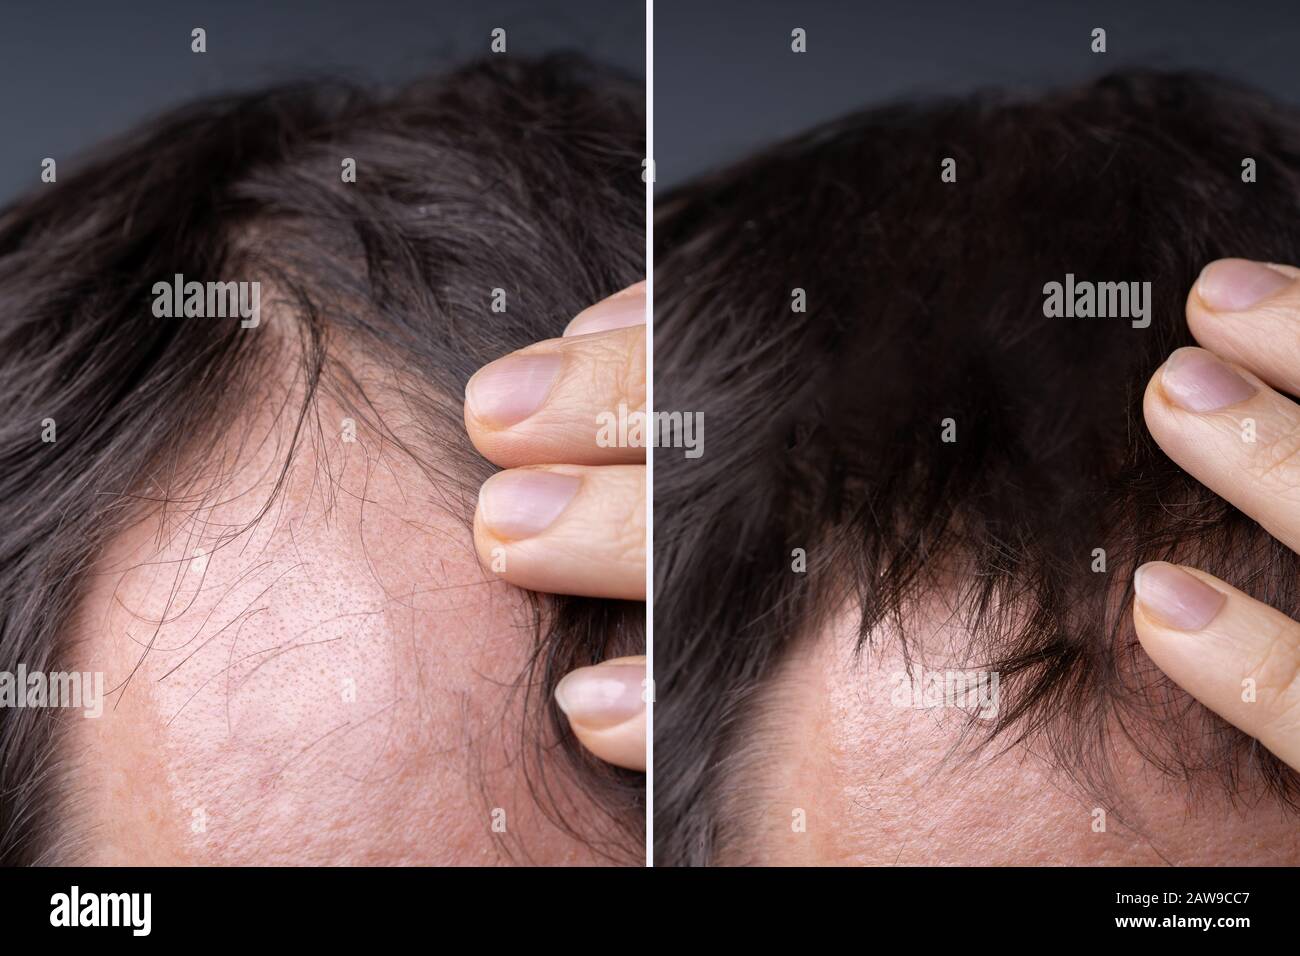 Man Before And After Successful Hair Loss Treatment Stock Photo